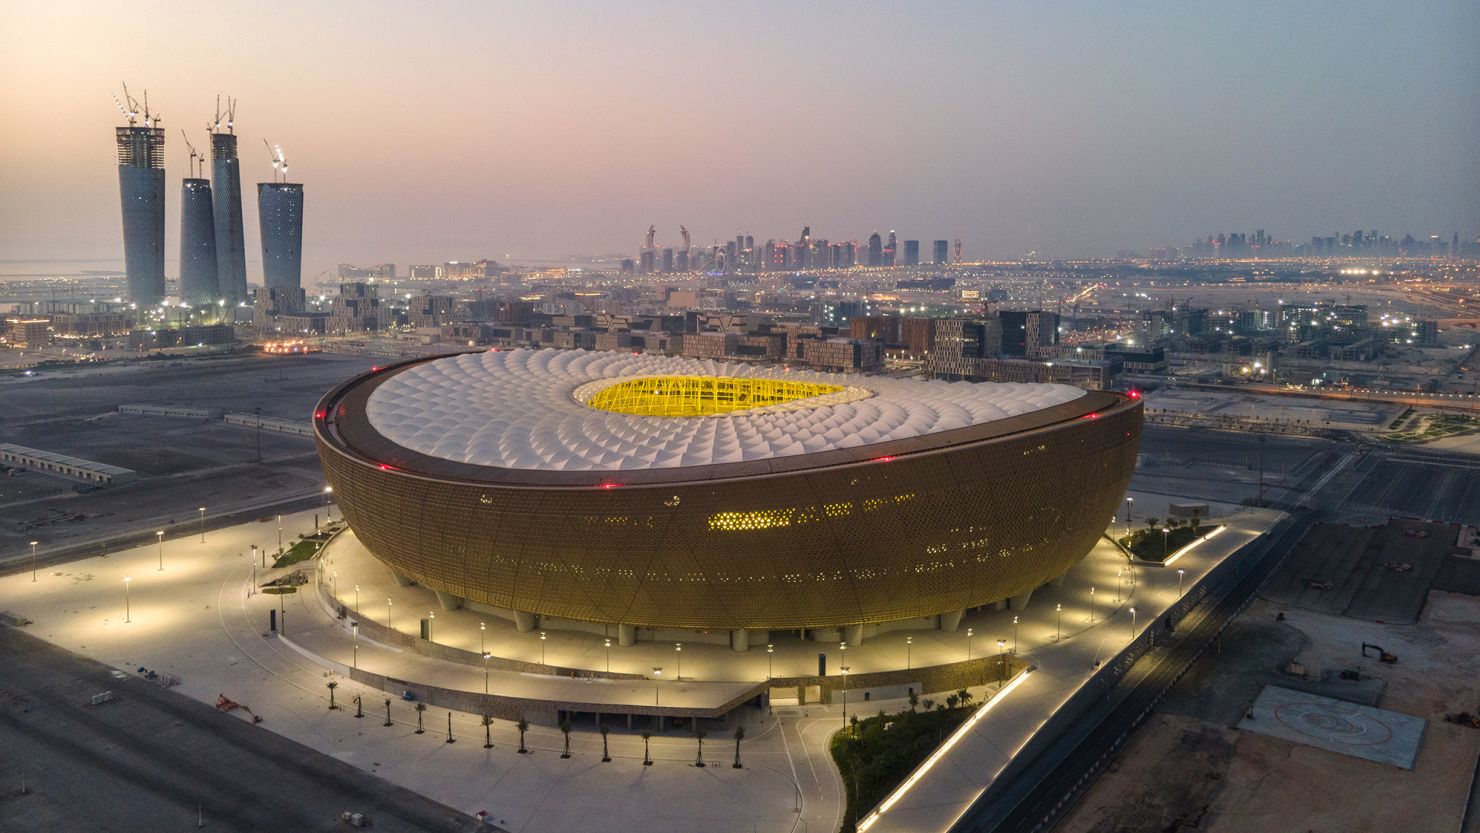 Opinion: Let's call out the Qatar World Cup for what it really is